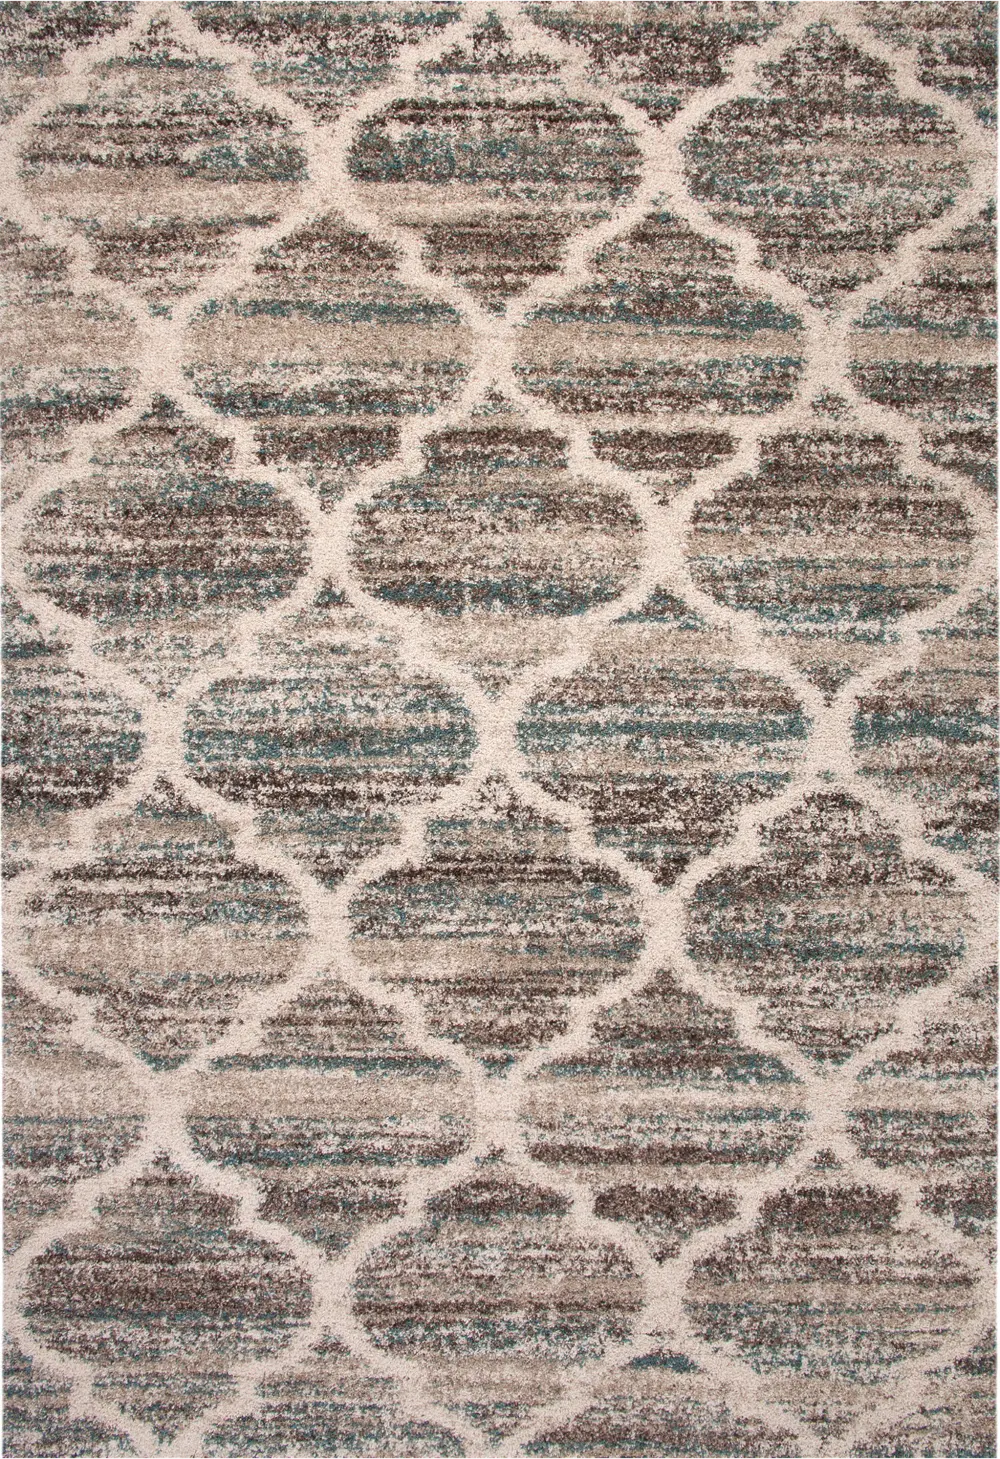 8 x 11 Large Brown, Beige, Ivory, and Teal Area Rug - Granada-1